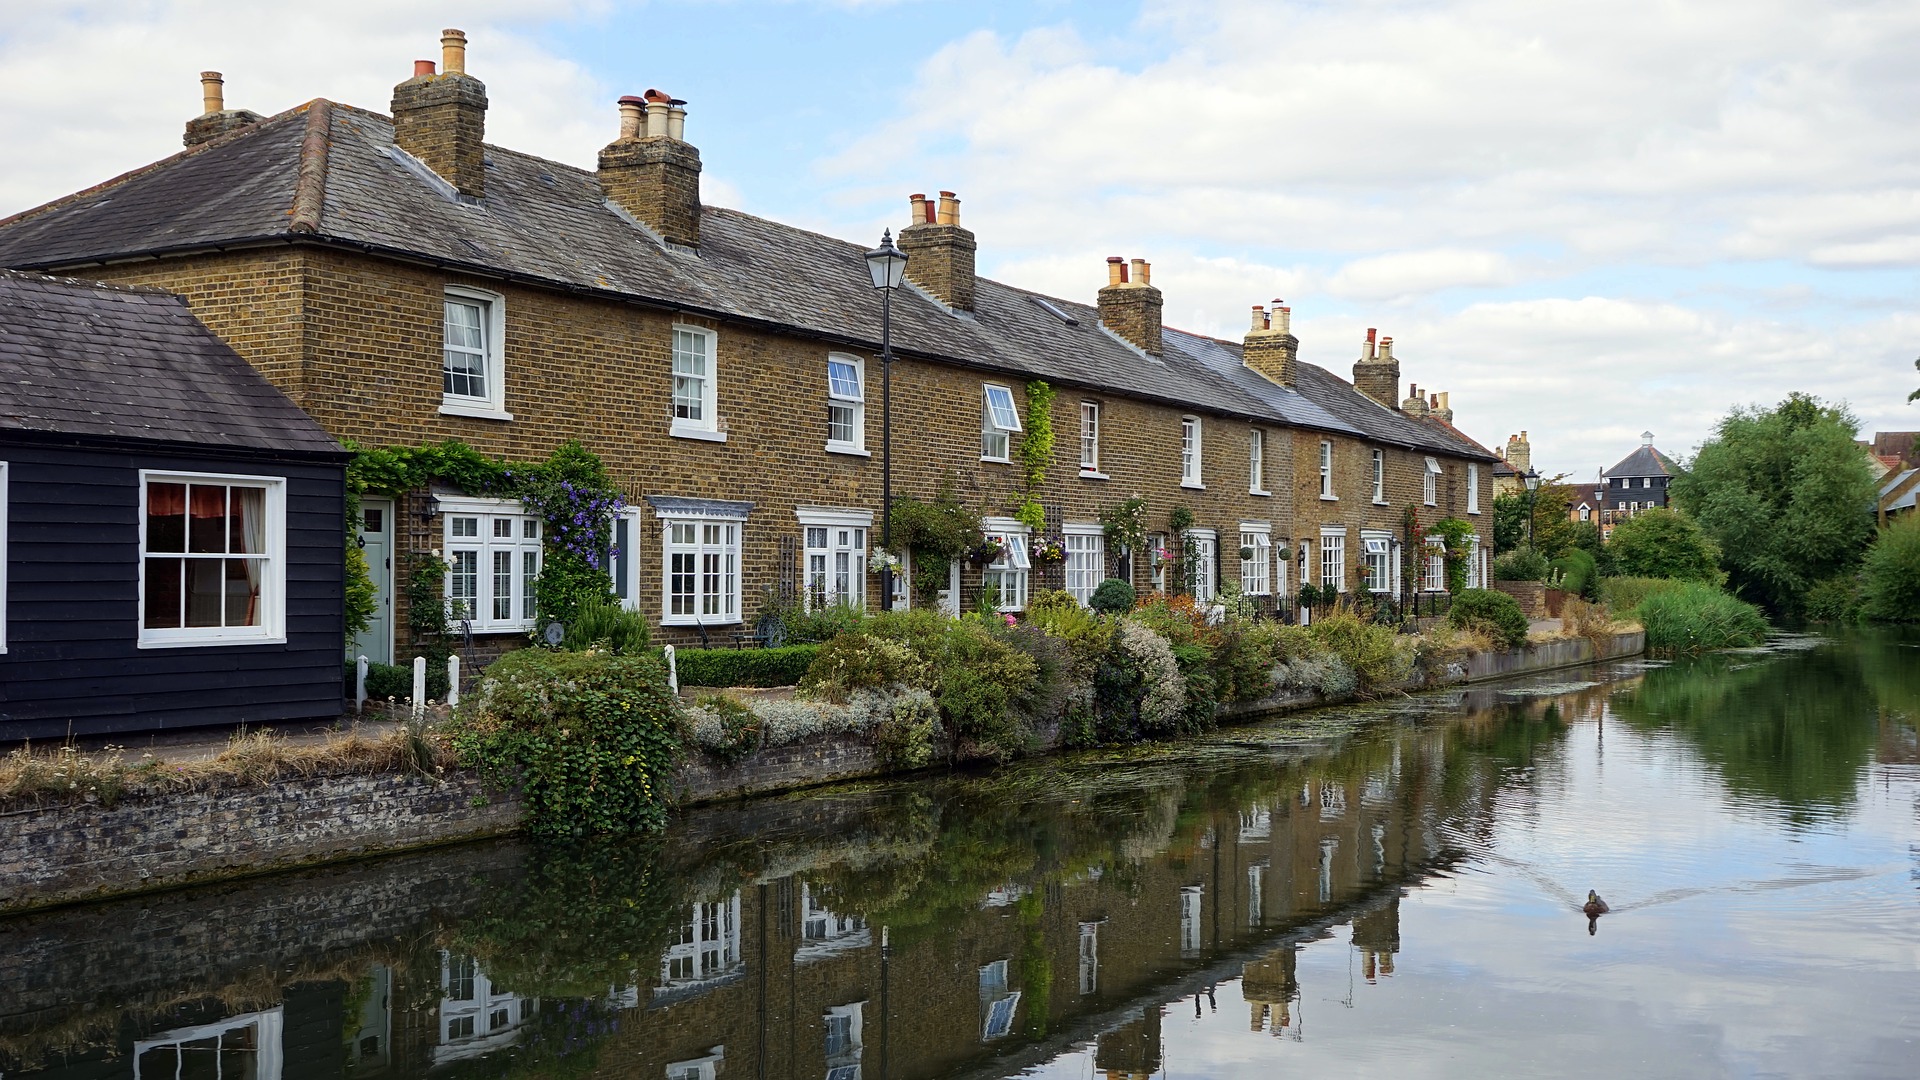 A row of terraced homes by a river.